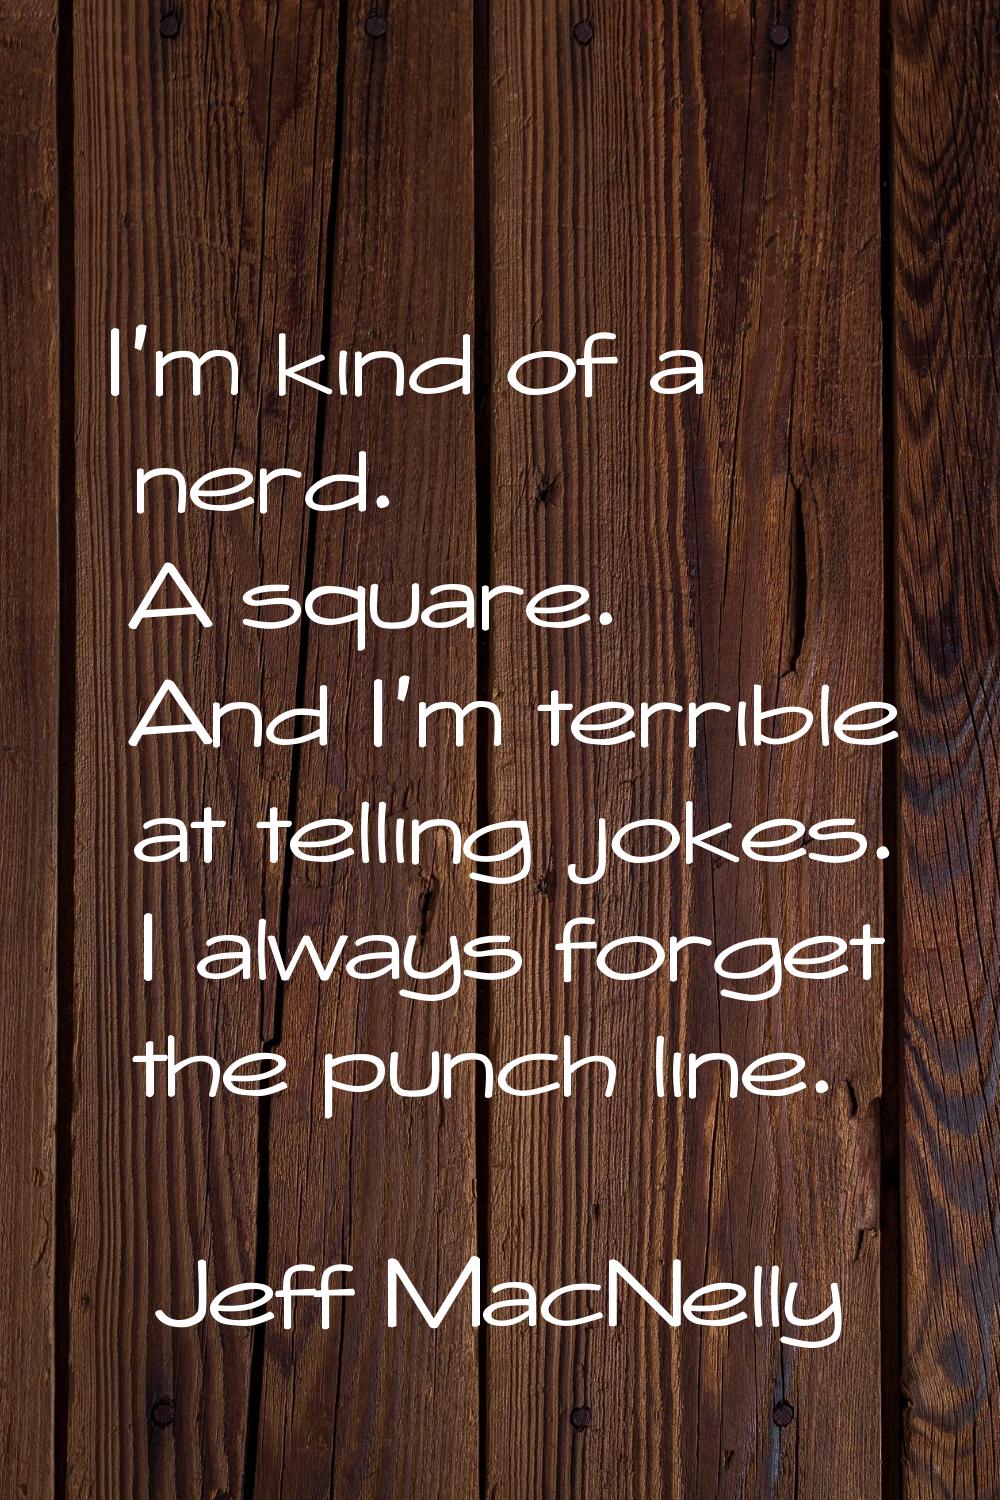 I'm kind of a nerd. A square. And I'm terrible at telling jokes. I always forget the punch line.